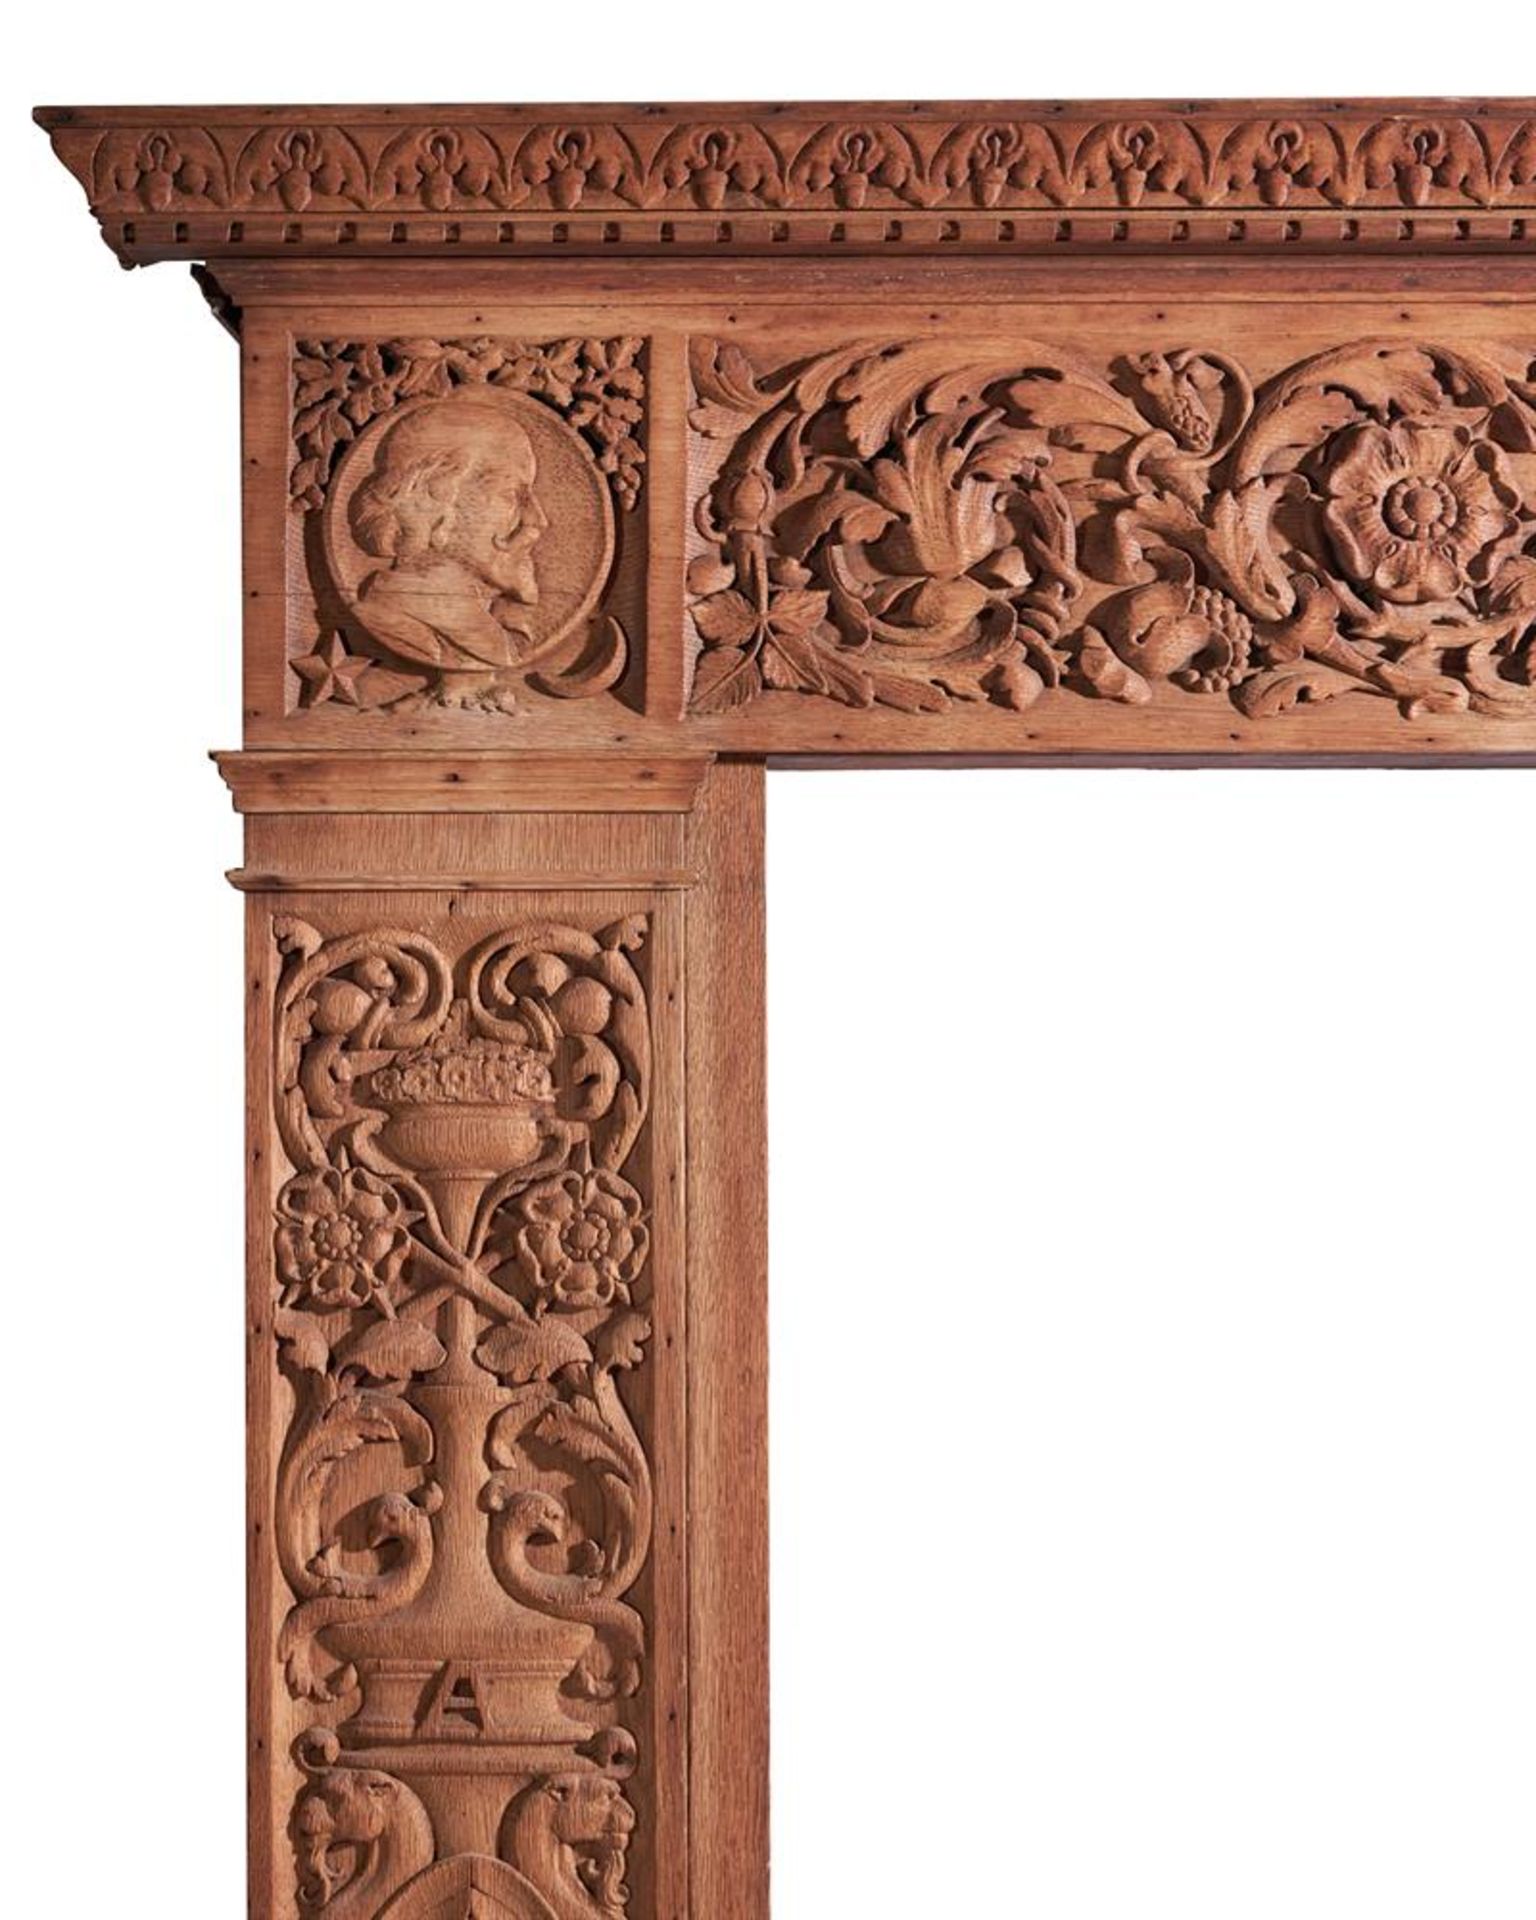 A VICTORIAN RENAISSANCE REVIVAL CARVED OAK CHIMNEYPIECE, LATE 19TH CENTURY - Image 4 of 6